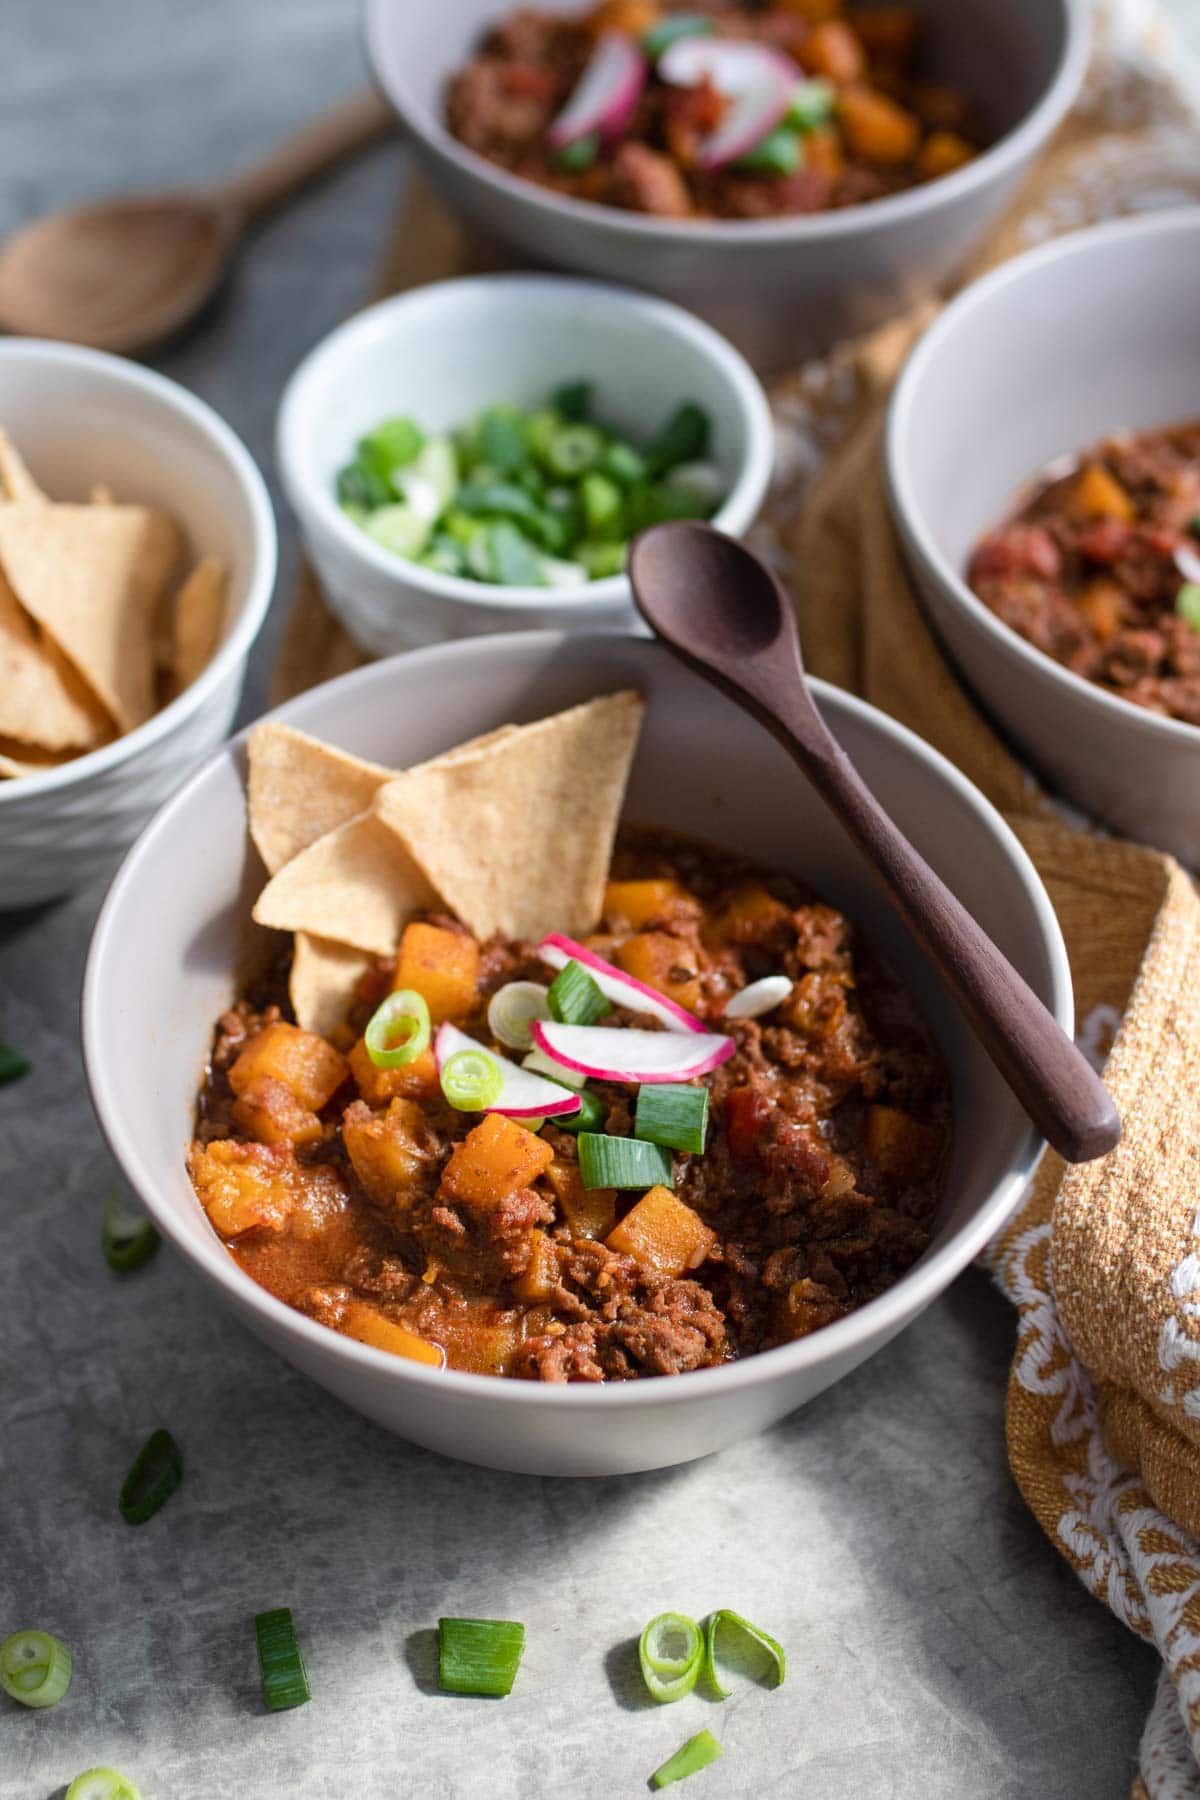 Beanless chili with tortilla chips.